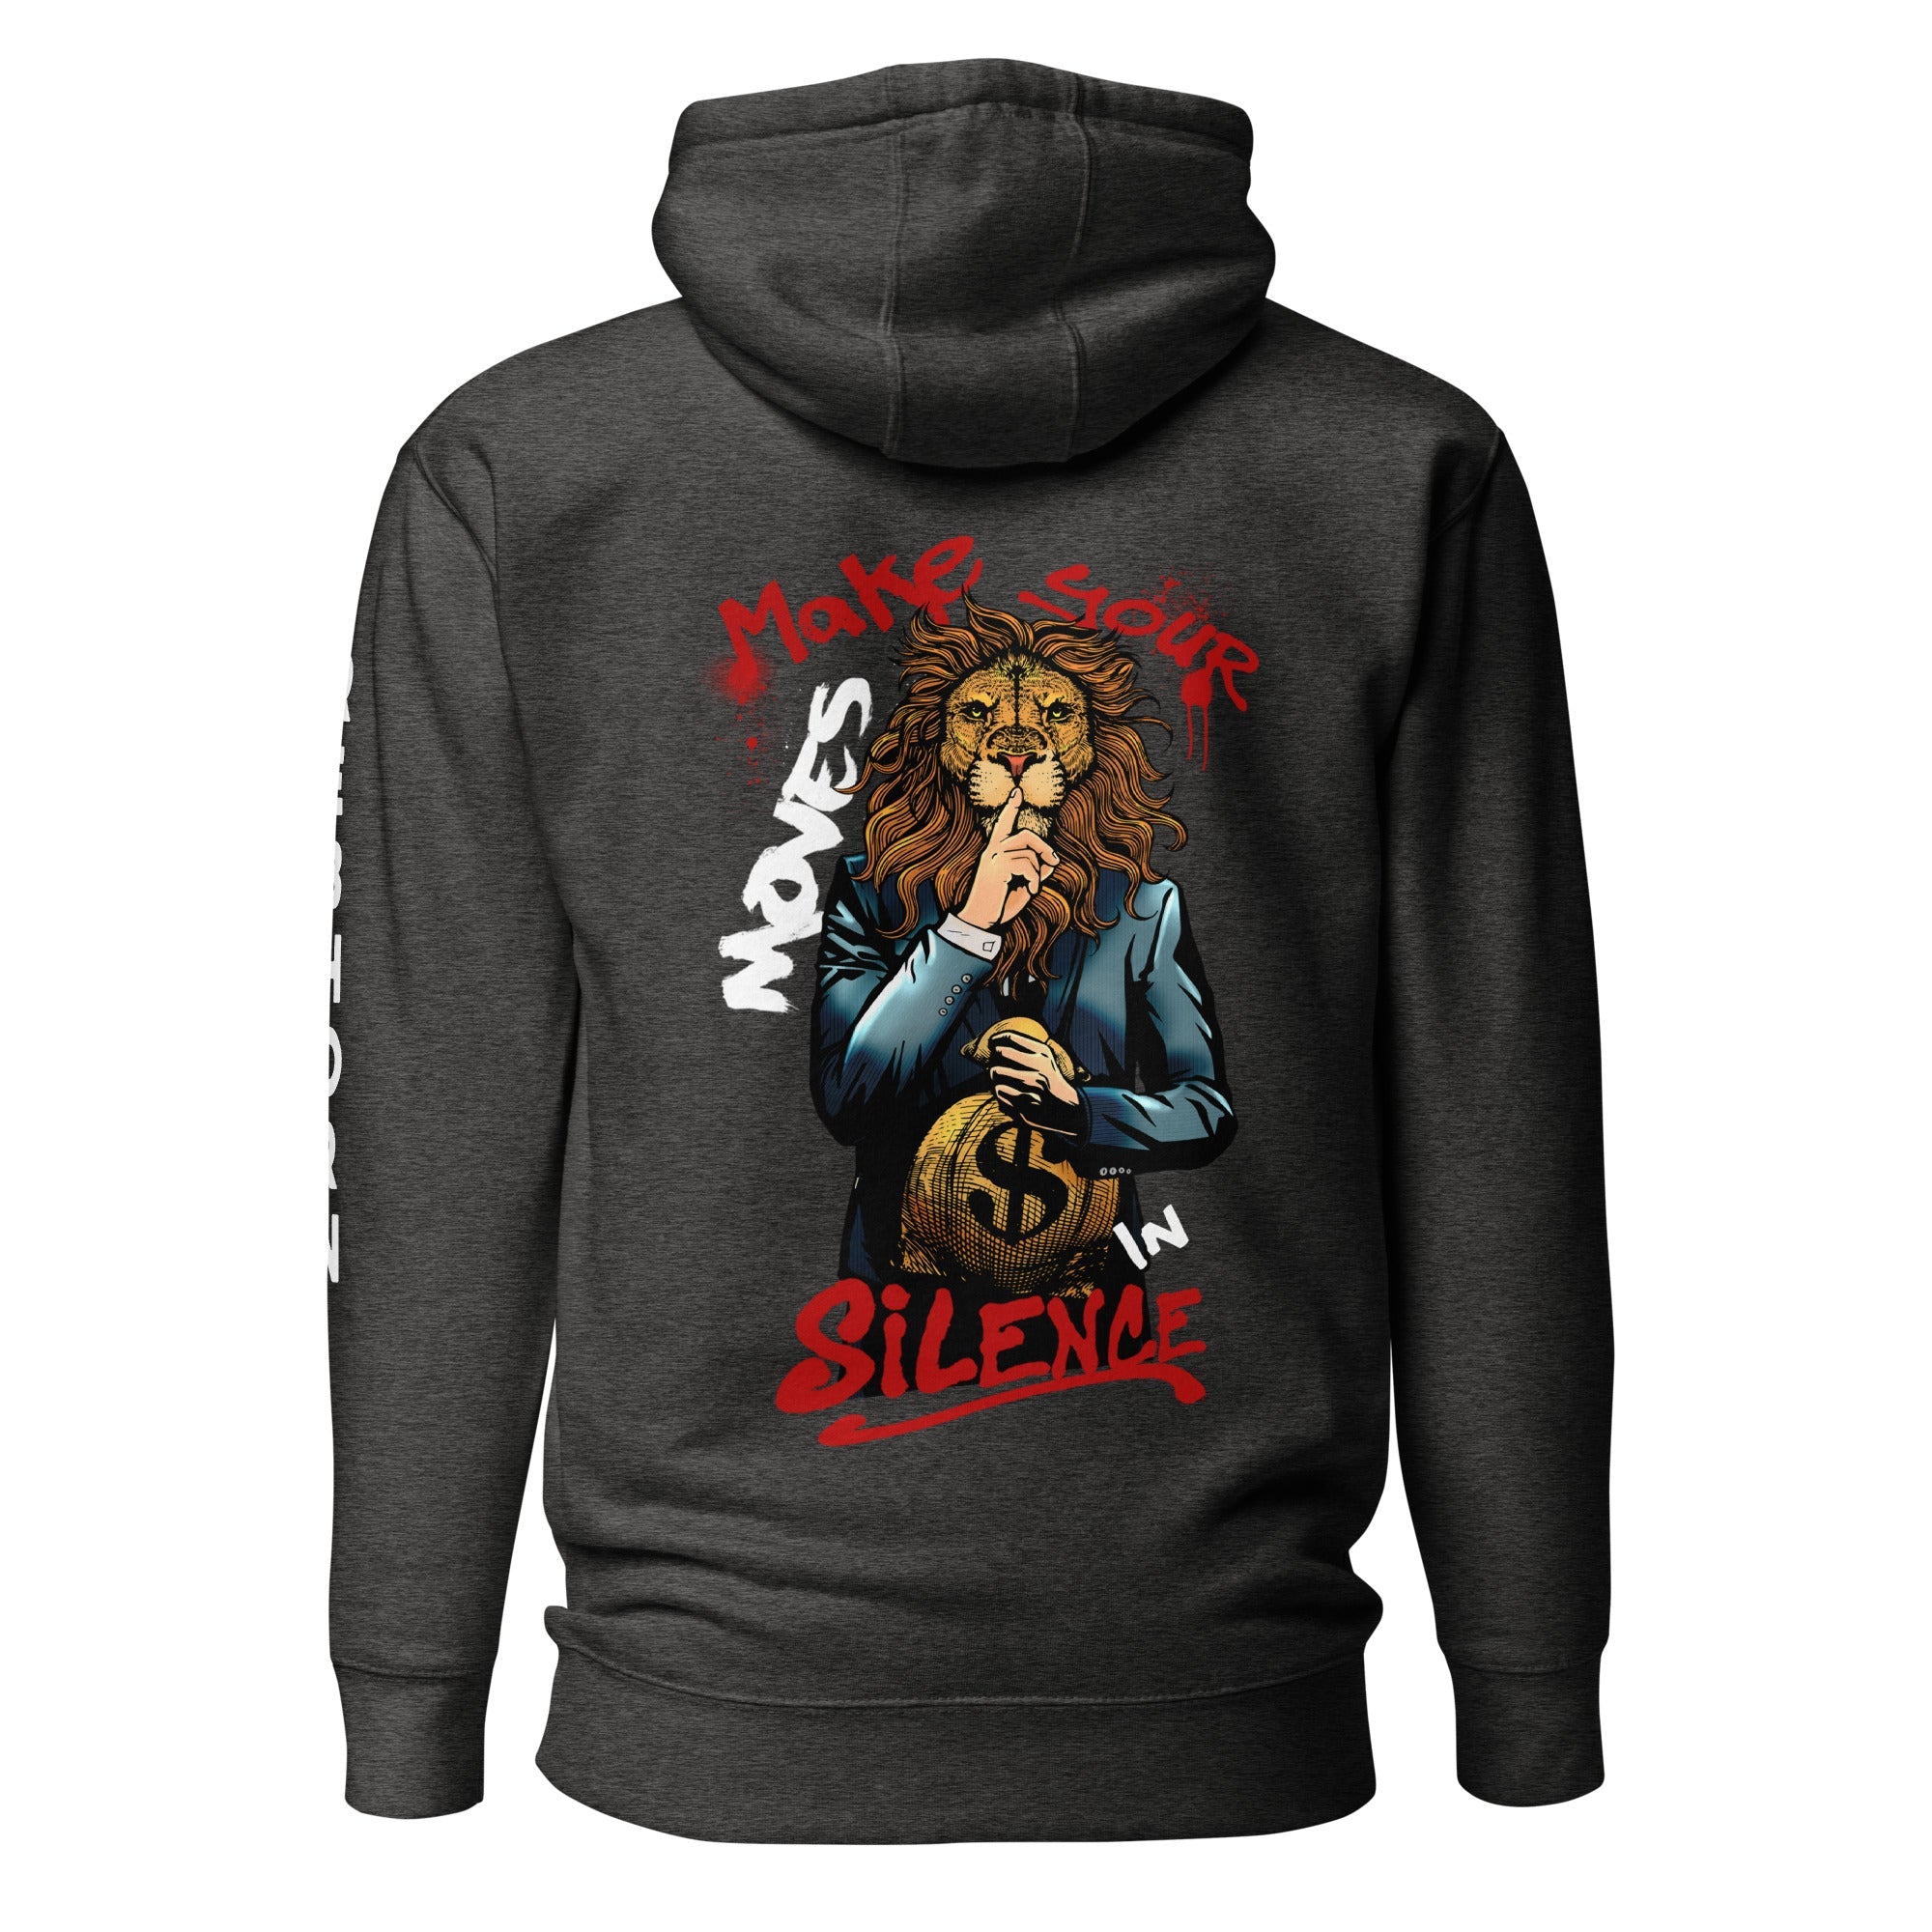 Make Your Moves in Silence Premium Unisex Hoodie - REBHORN DESIGN